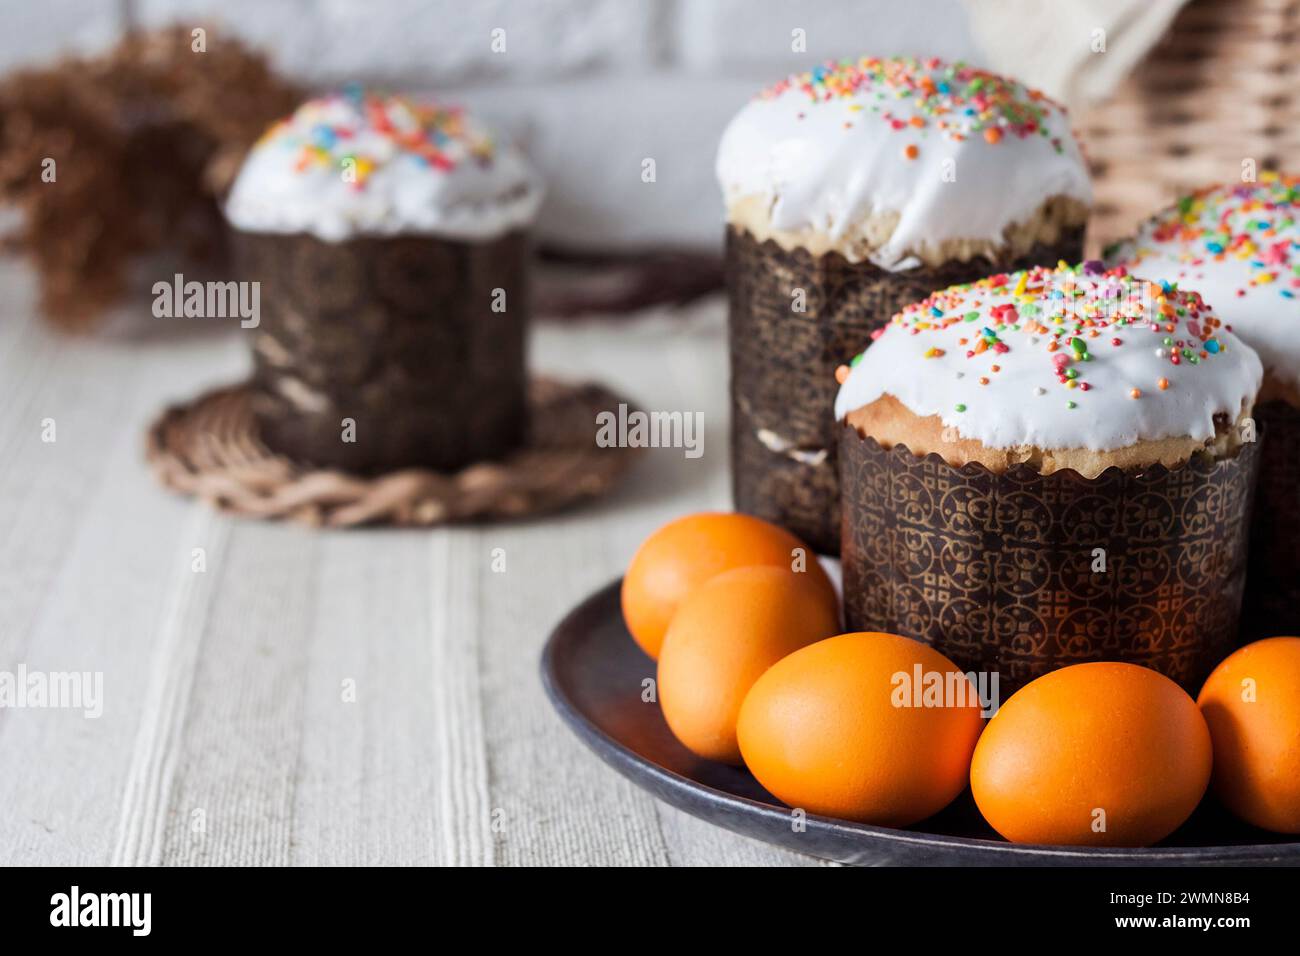 Glaze decorated Easter cakes and orange colored eggs on a plate closeup. Stock Photo